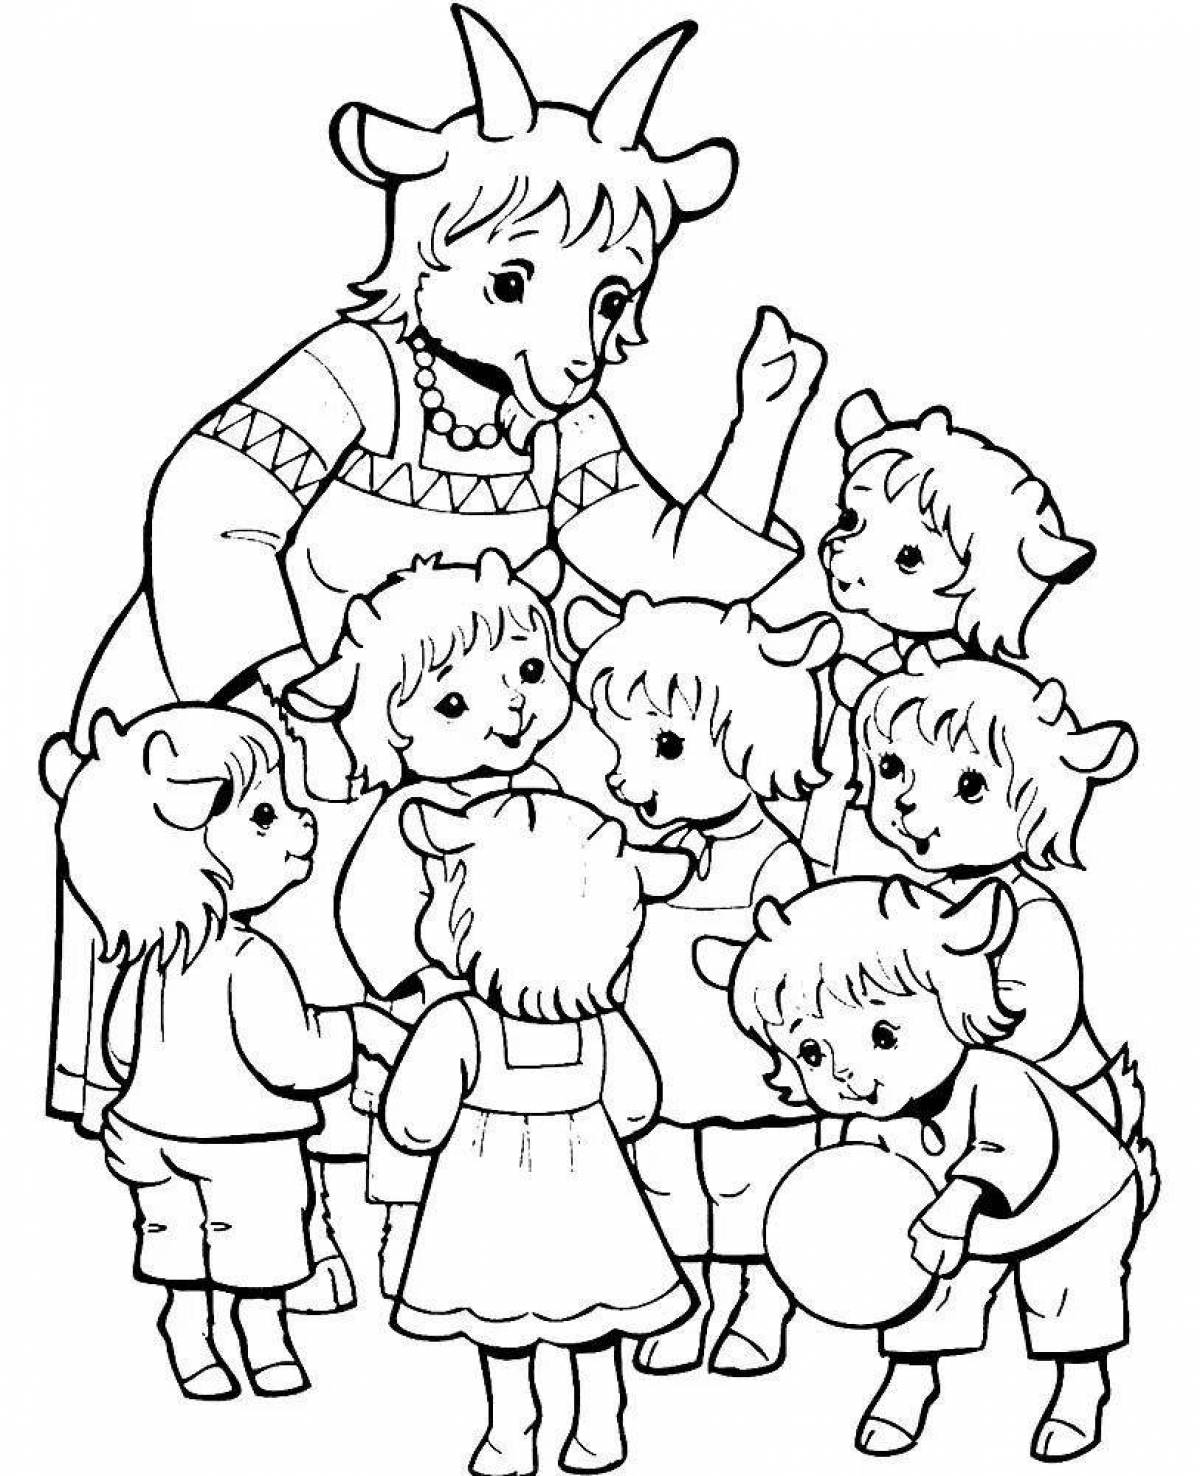 Fun coloring wolf and seven children poster